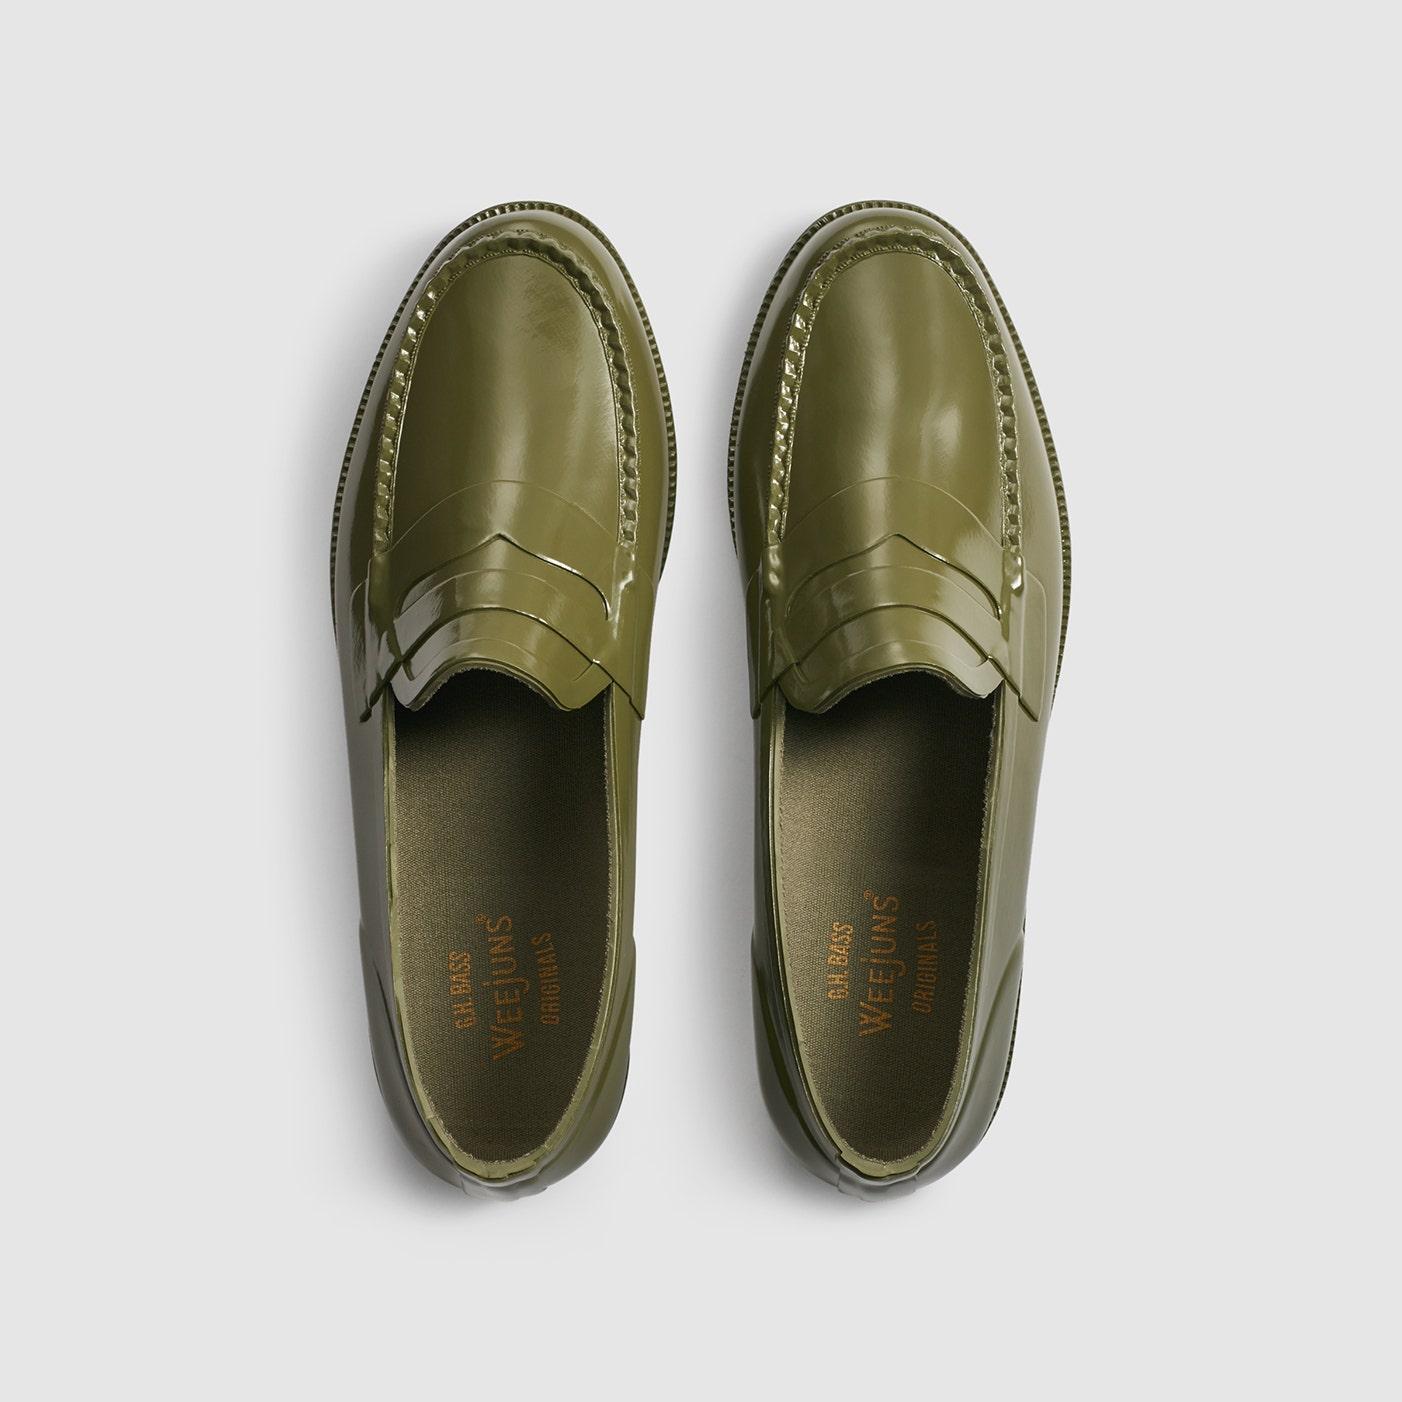 G.H. Bass & Co. Whitney Rubber Rain Weejuns Shoes in Green | Lyst